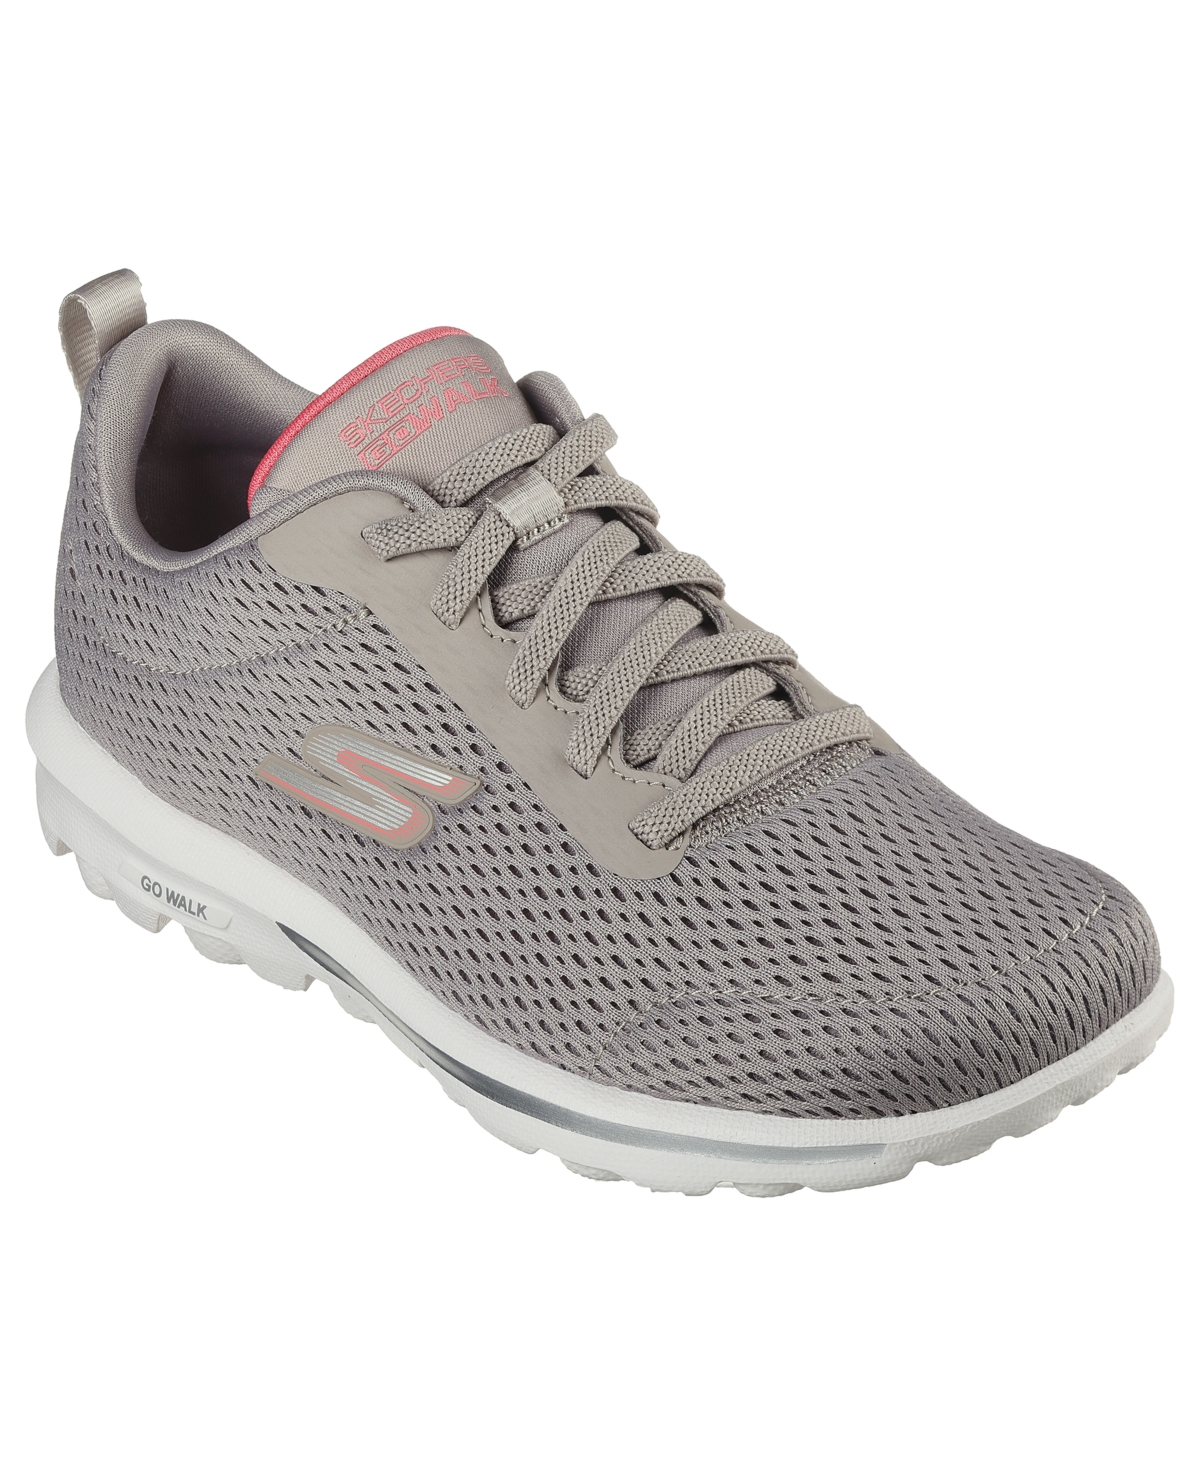 Women's Go Walk Travel - Fun Journey Walking Sneakers from Finish Line - Taupe